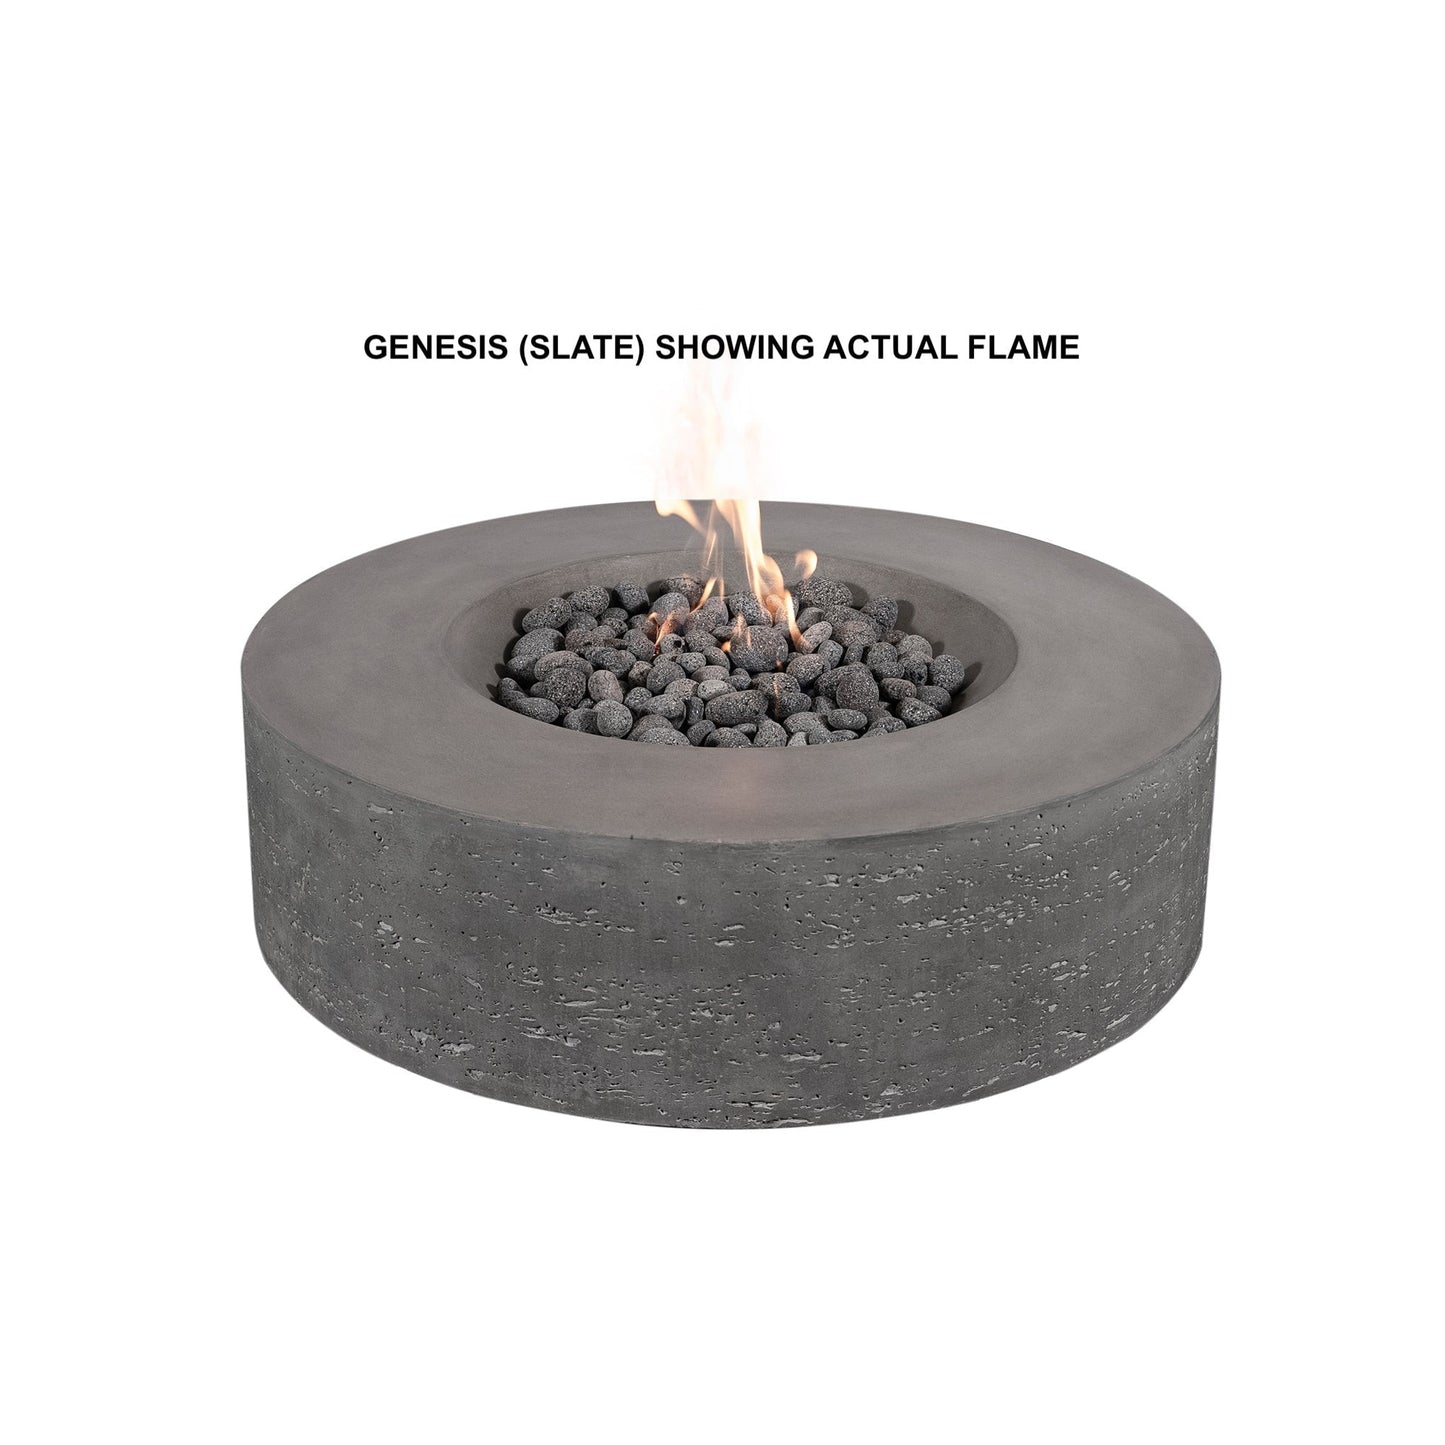 PyroMania Genesis 41" Round Charcoal Outdoor Propane Gas Fire Pit Table